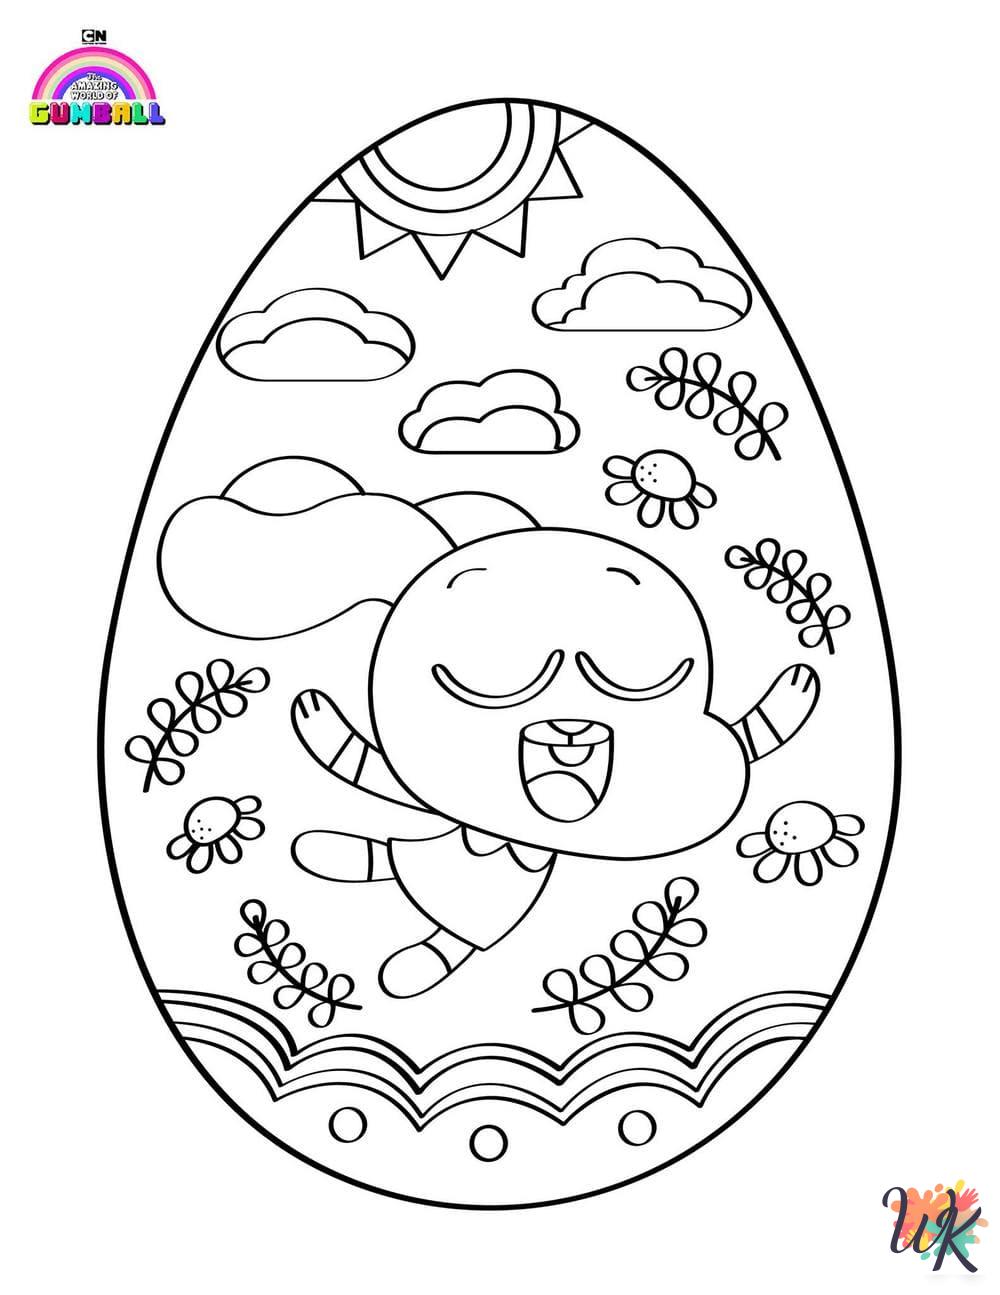 Gumball ornament coloring pages 1